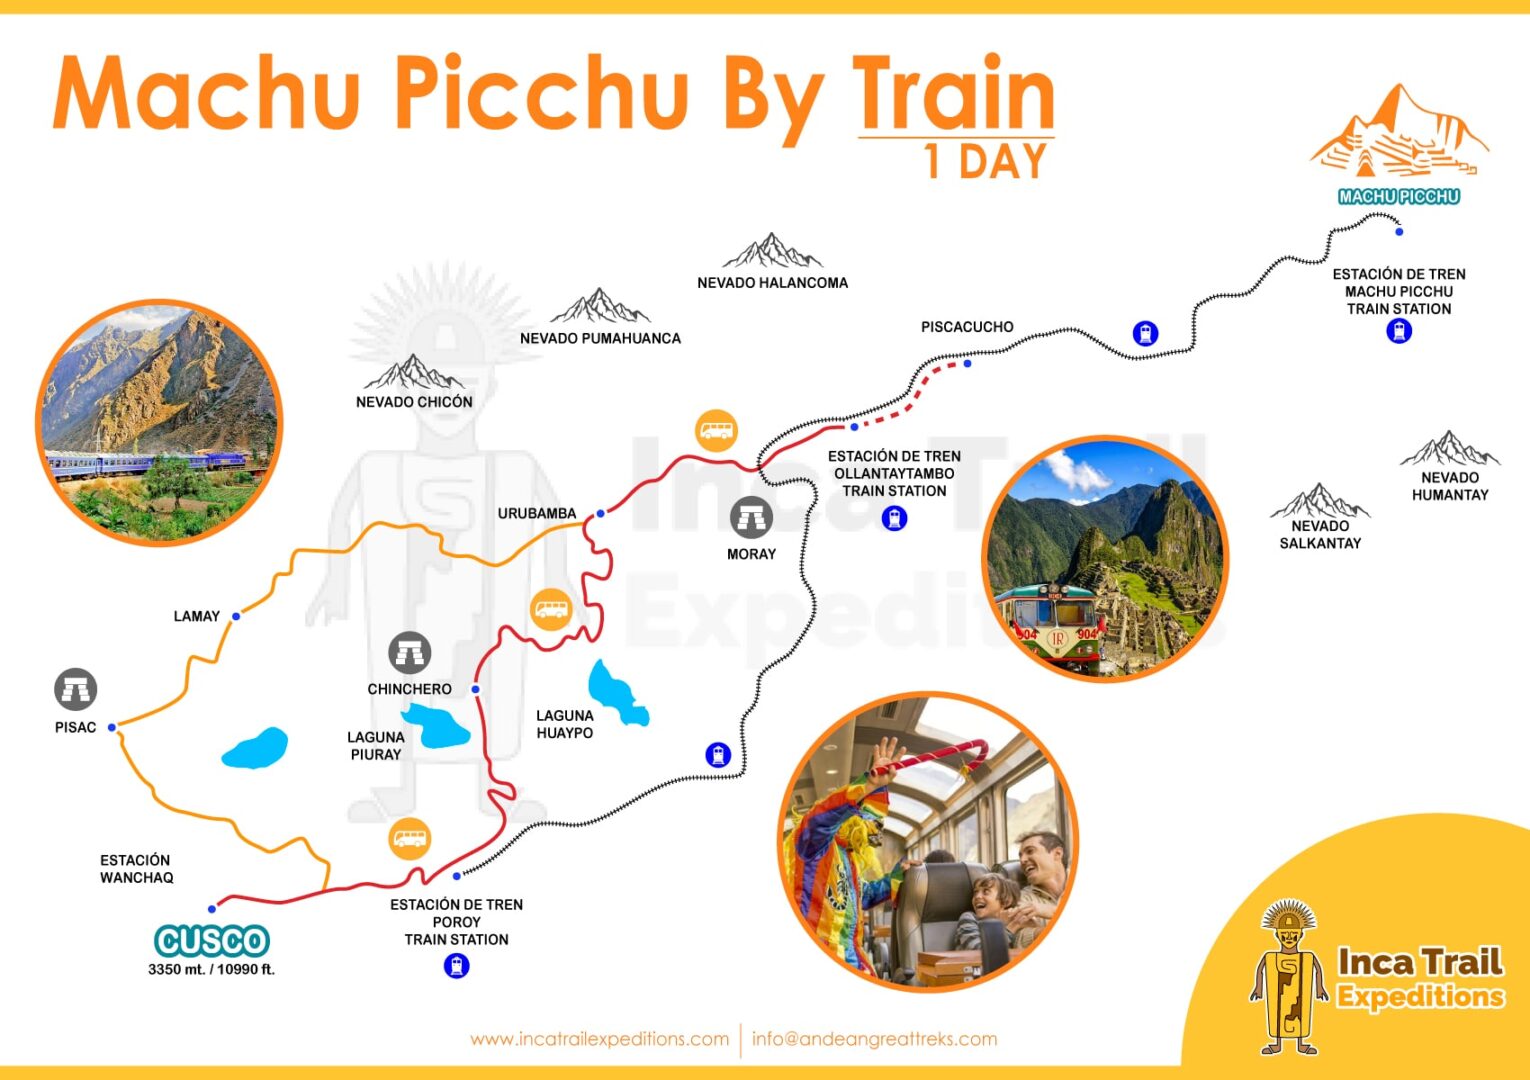 MACHUPICCHU-BY-TRAIN-1-DAY-BY-INCA-TRAIL-EXPEDITIONS